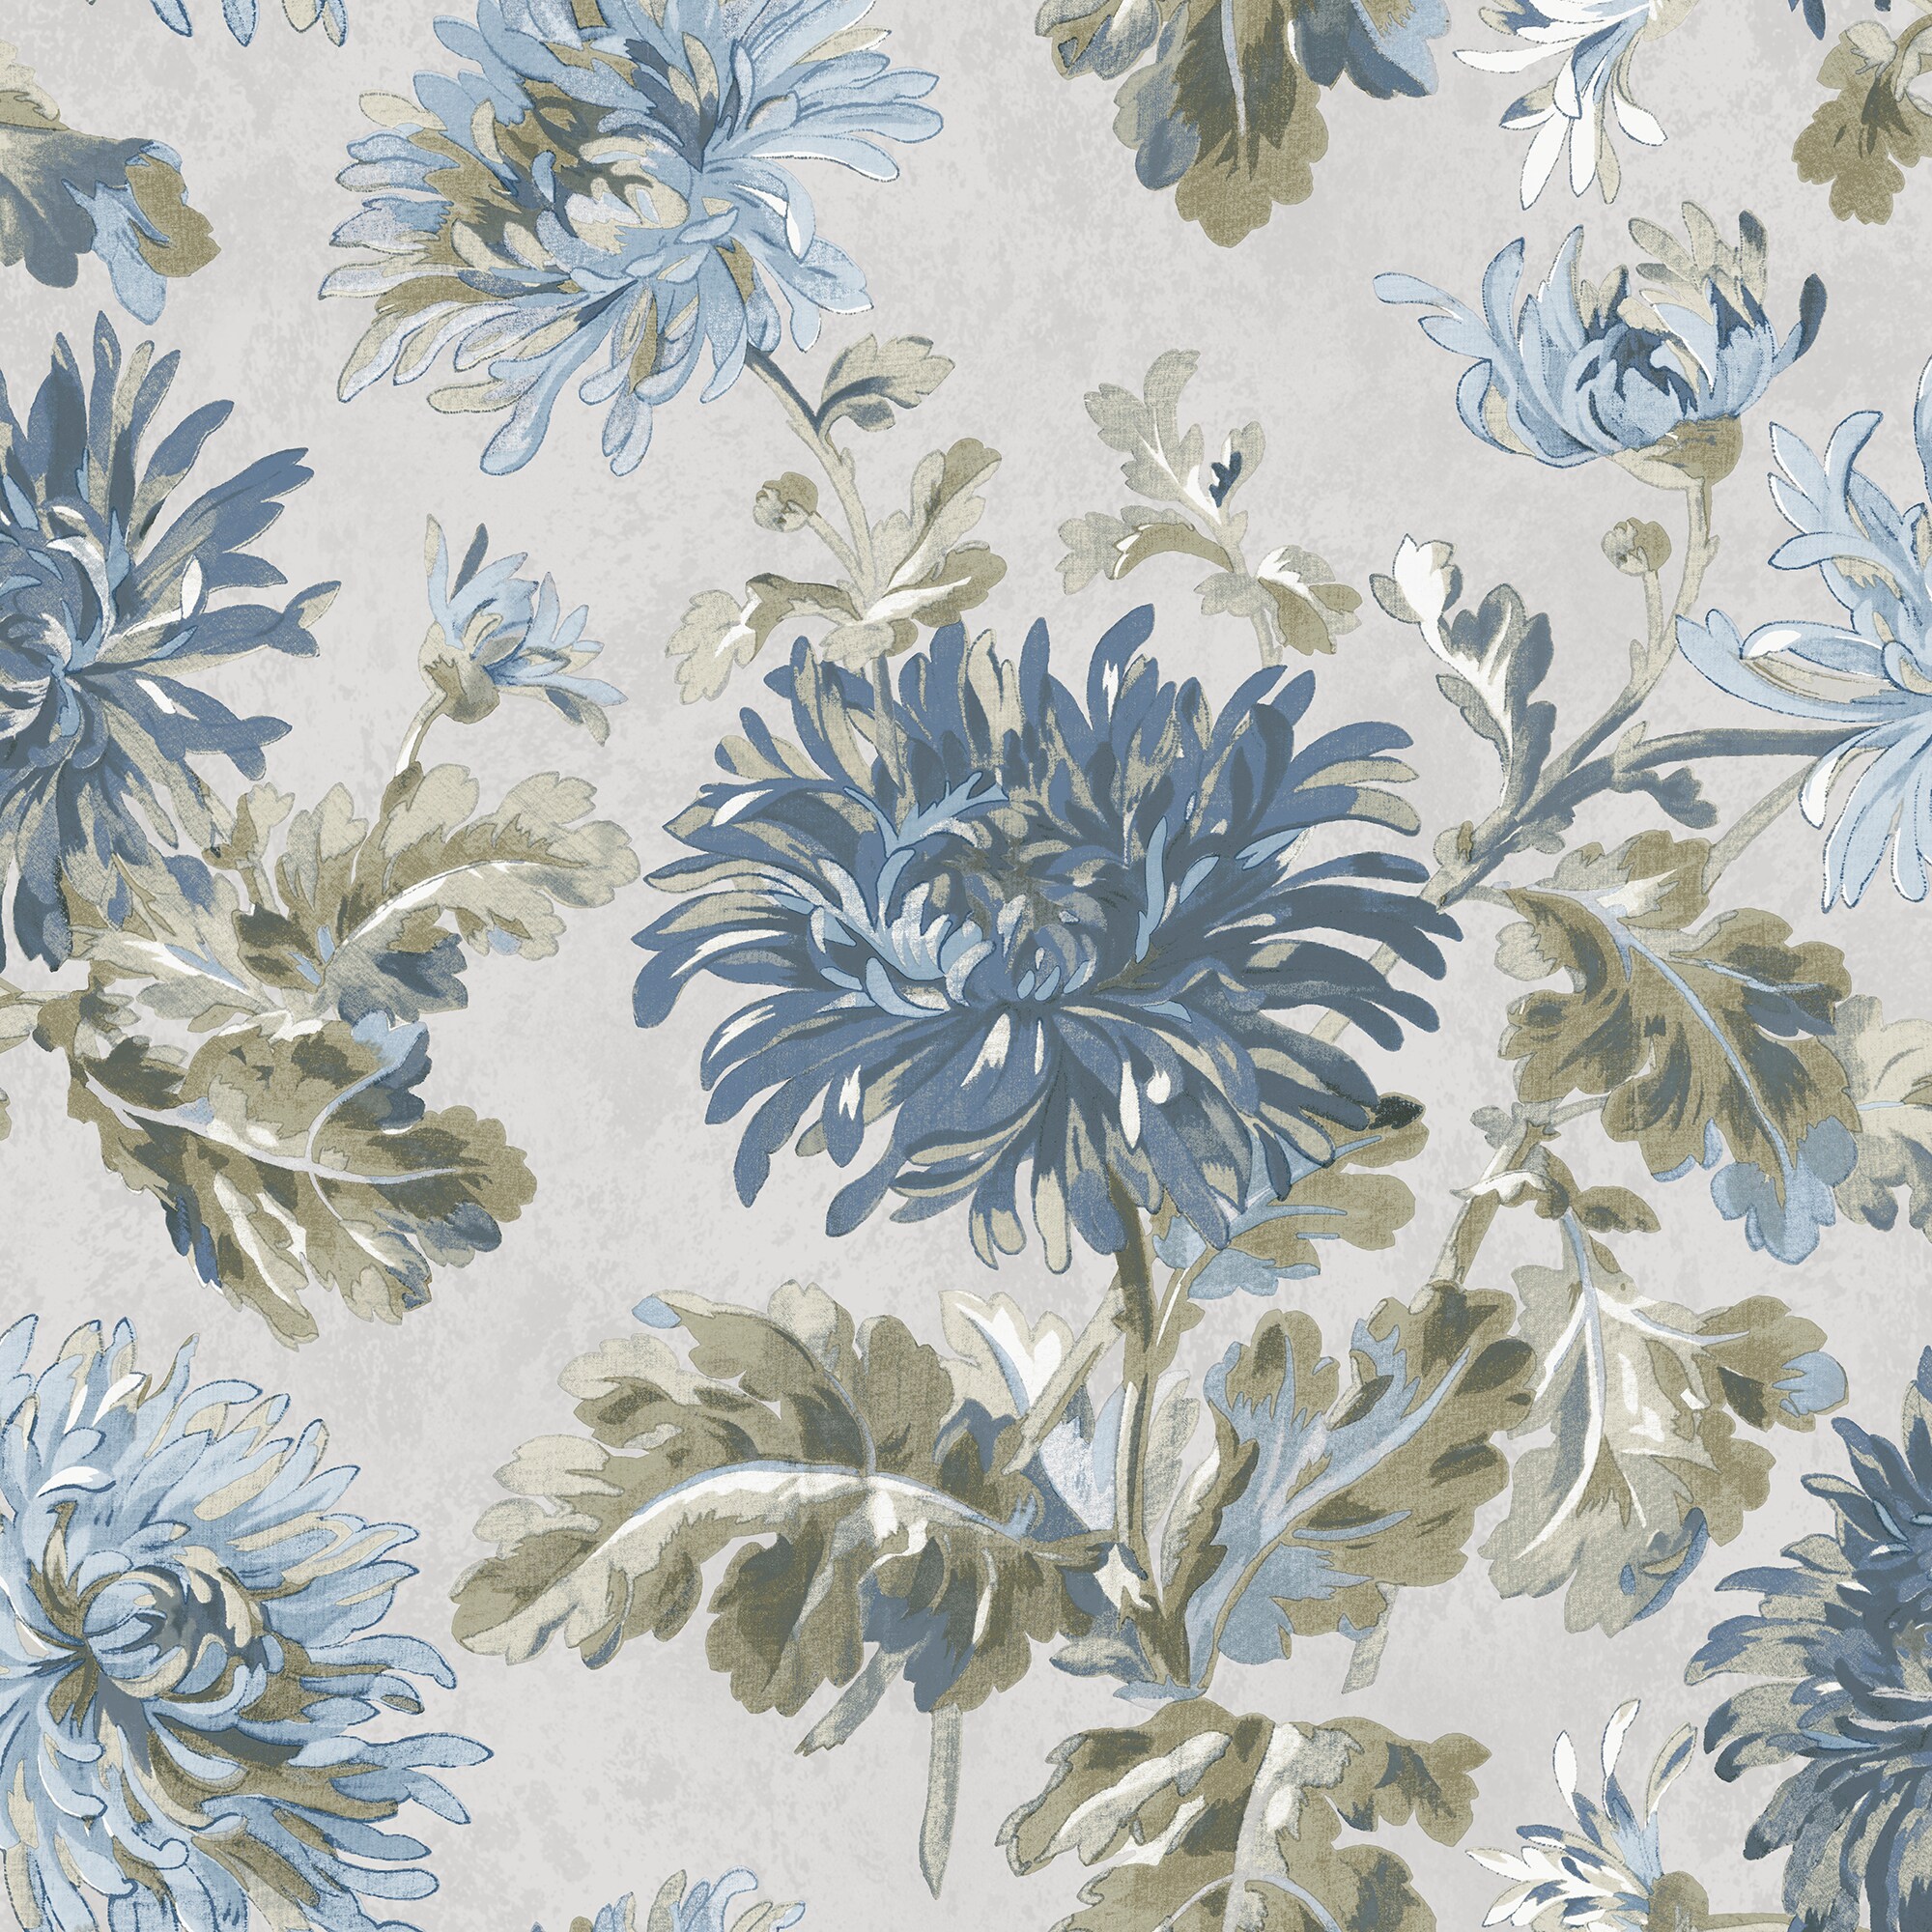 Tapestry Floral by Laura Ashley - Slate Grey - Wallpaper